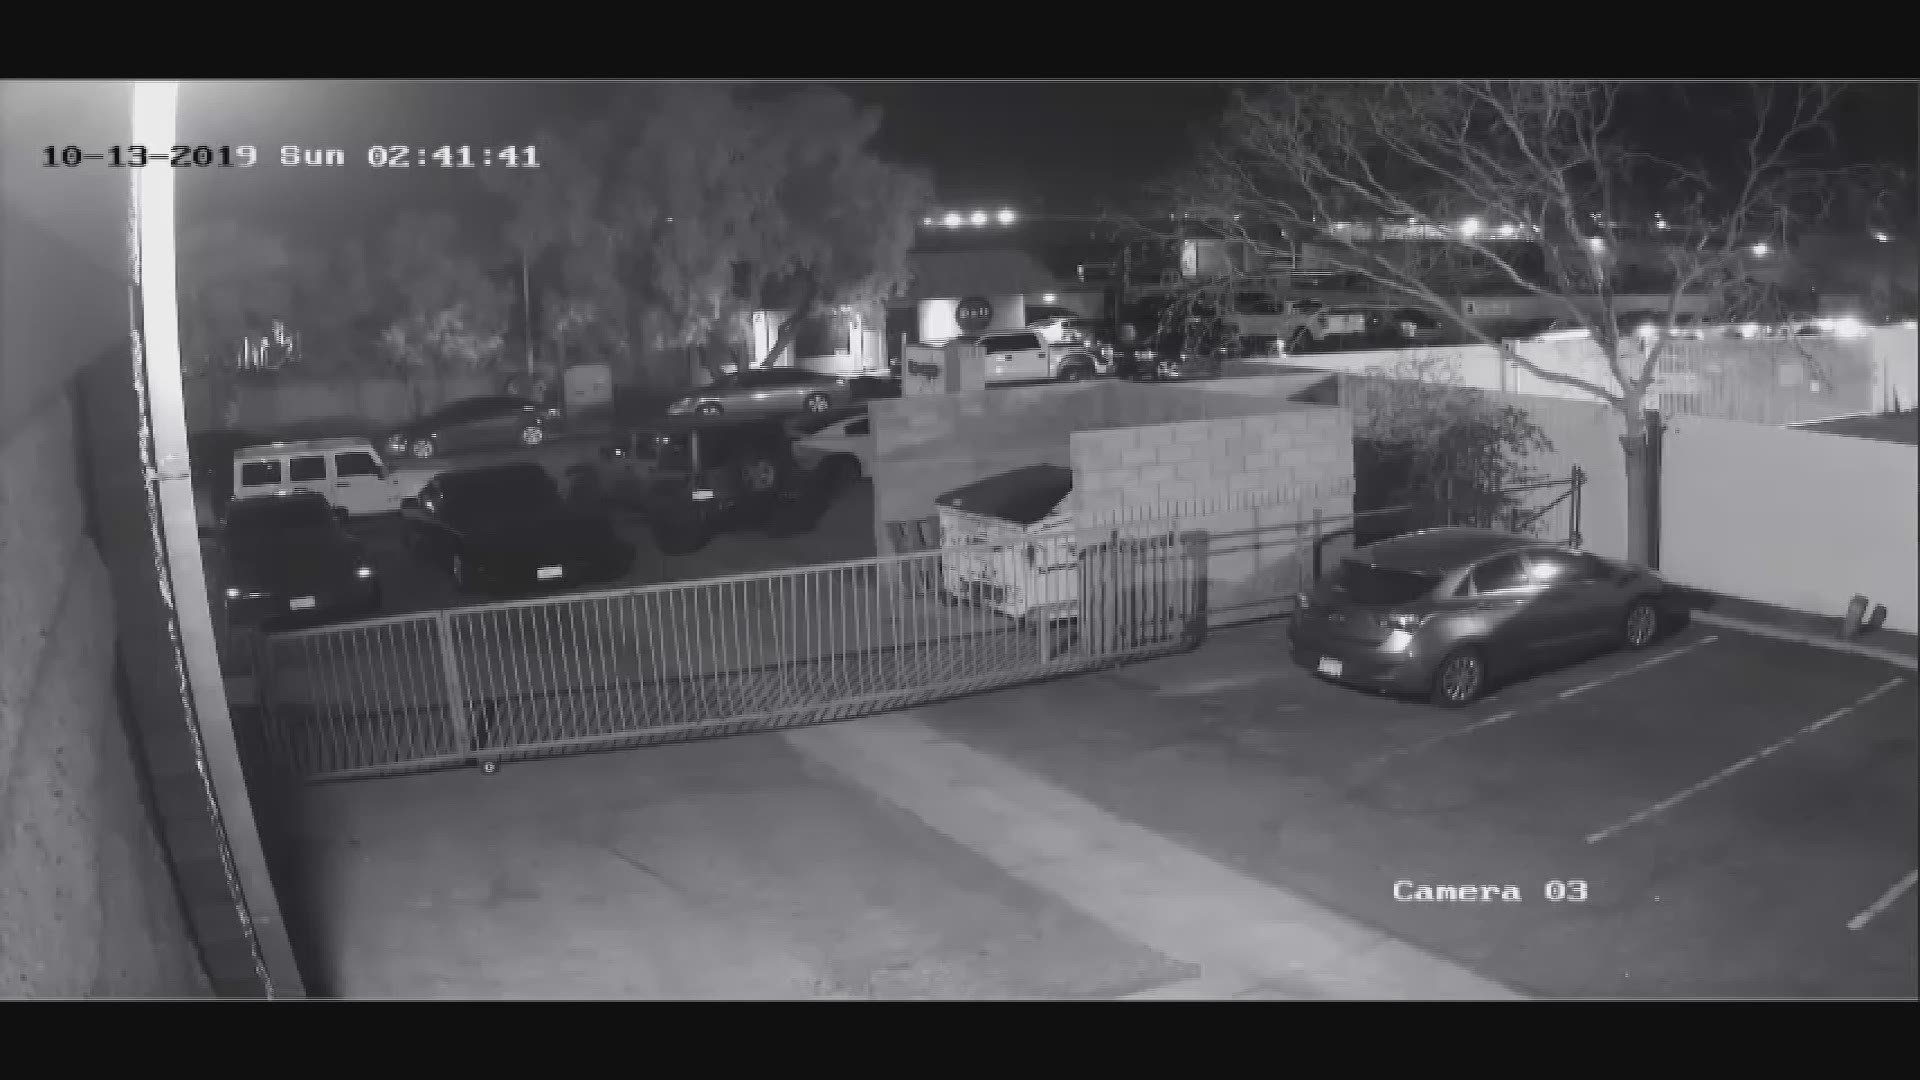 Video from a nearby building shows police shoot a man who they say had a gun at a street party in Glendale.